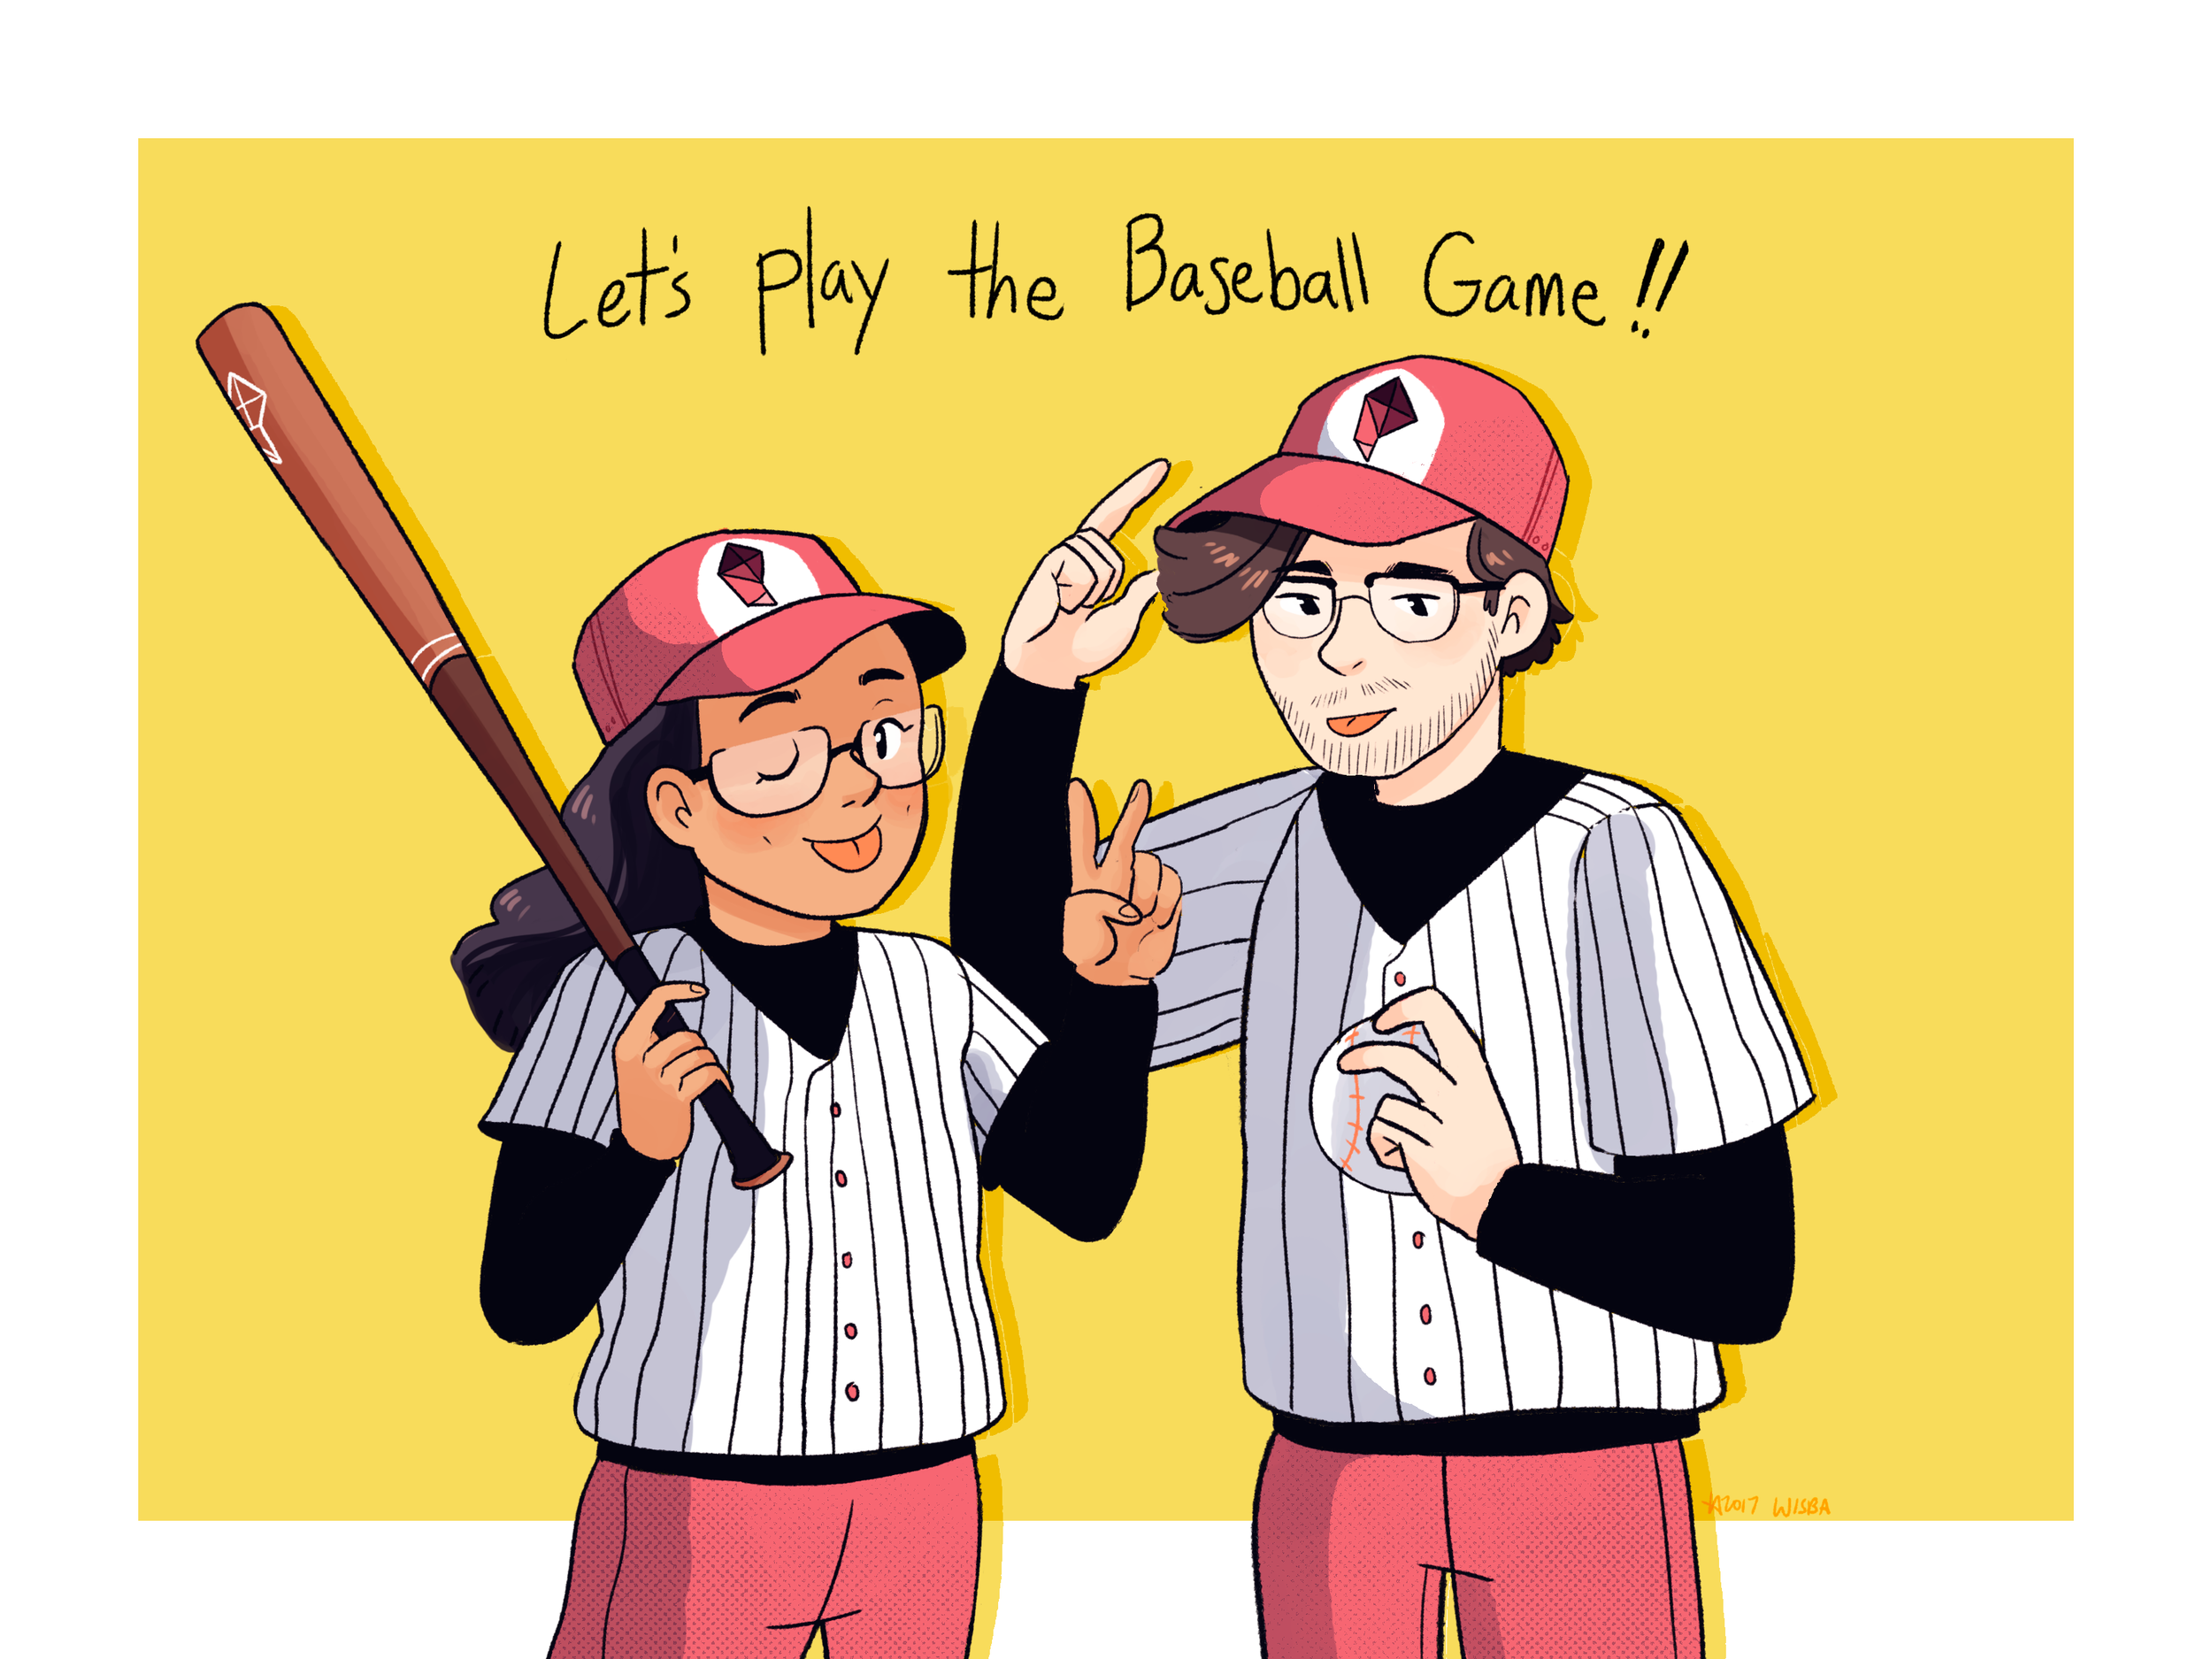  Let's Play the Baseball Game!  Digital 2017 